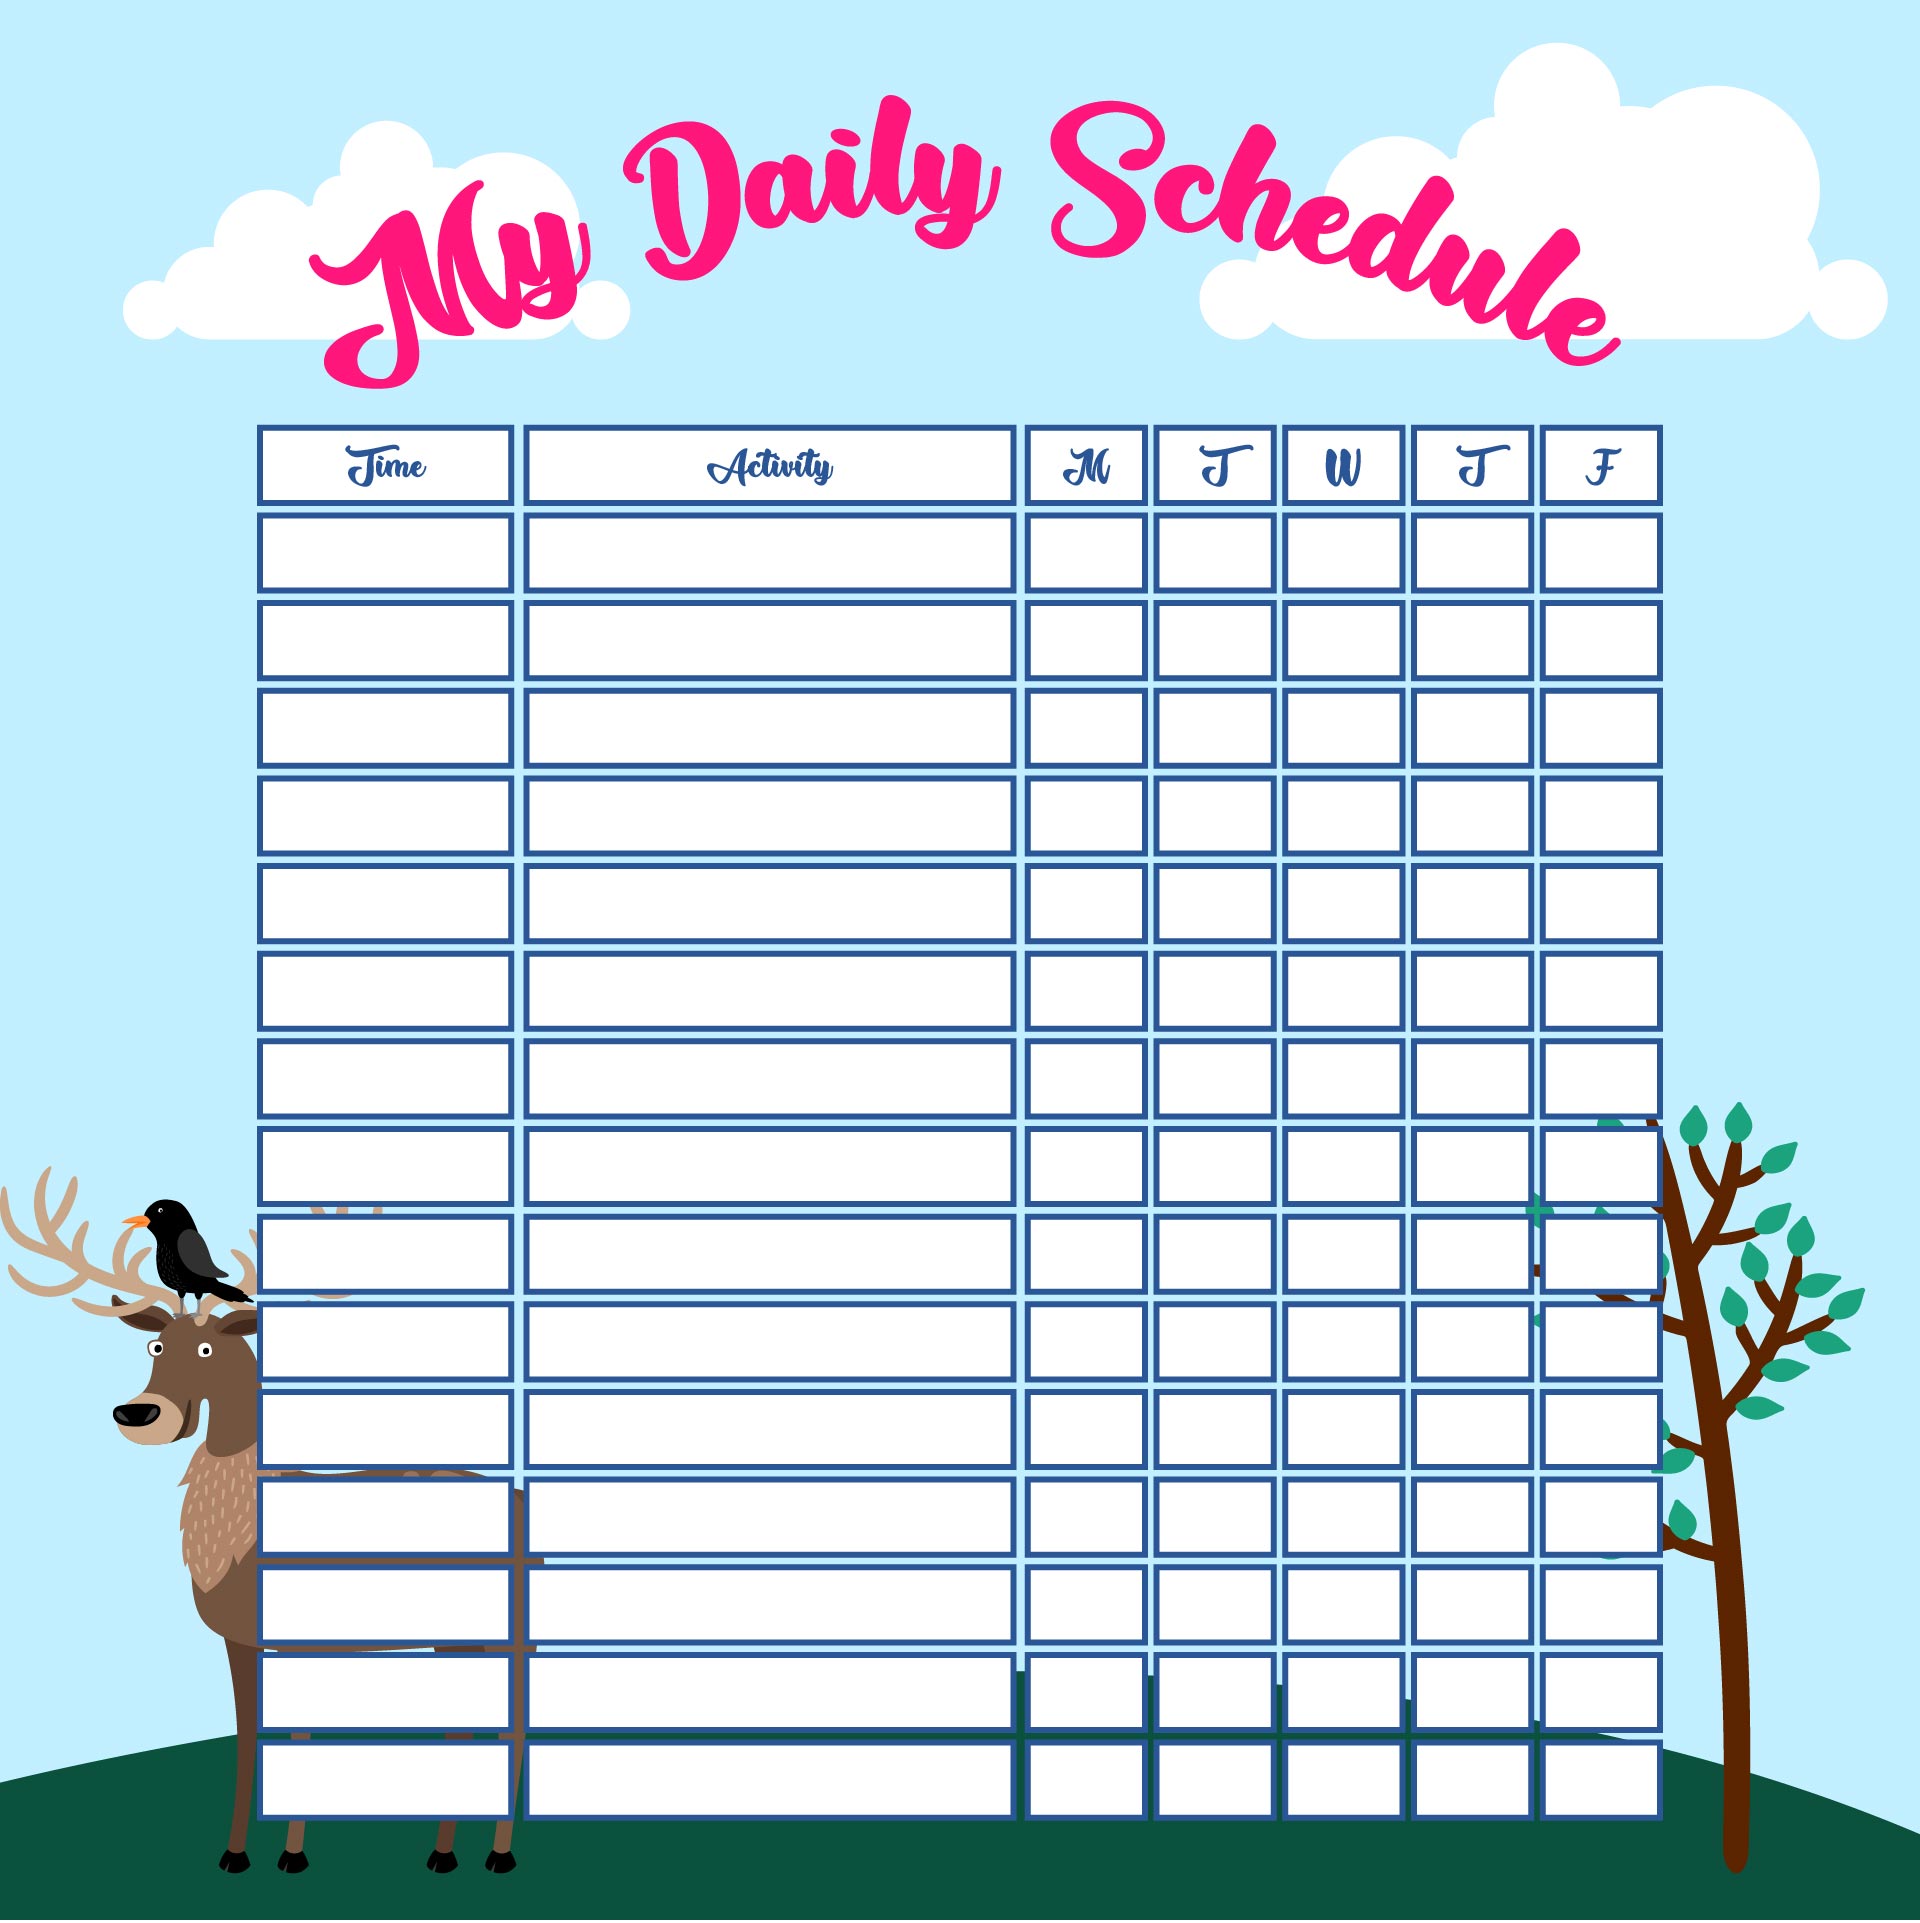 Daily Schedule Template For Kids